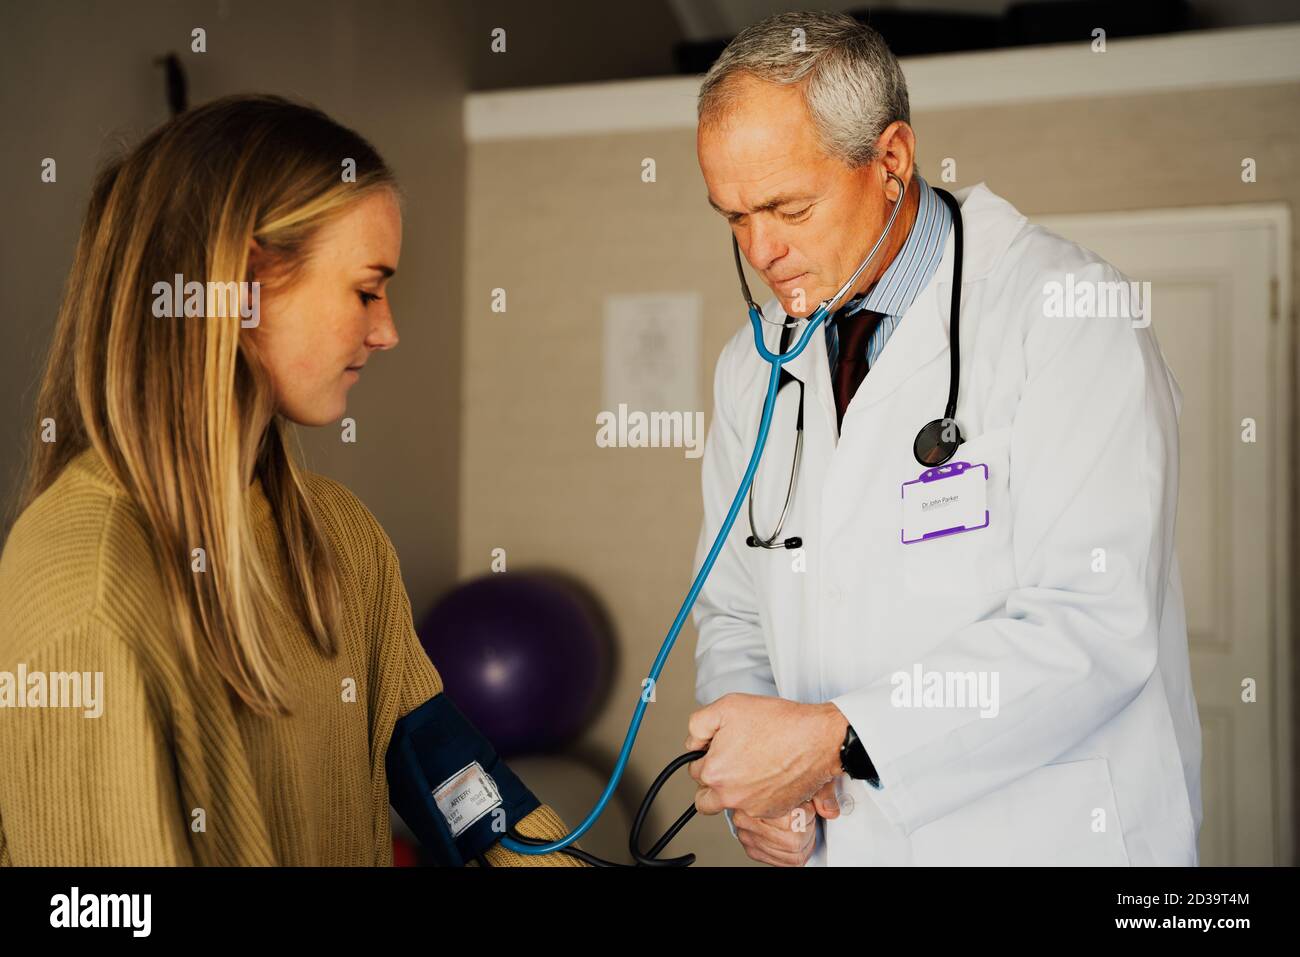 Elderly male doctor gently taking blood pressure from young female patient sitting in doctors office. Stock Photo